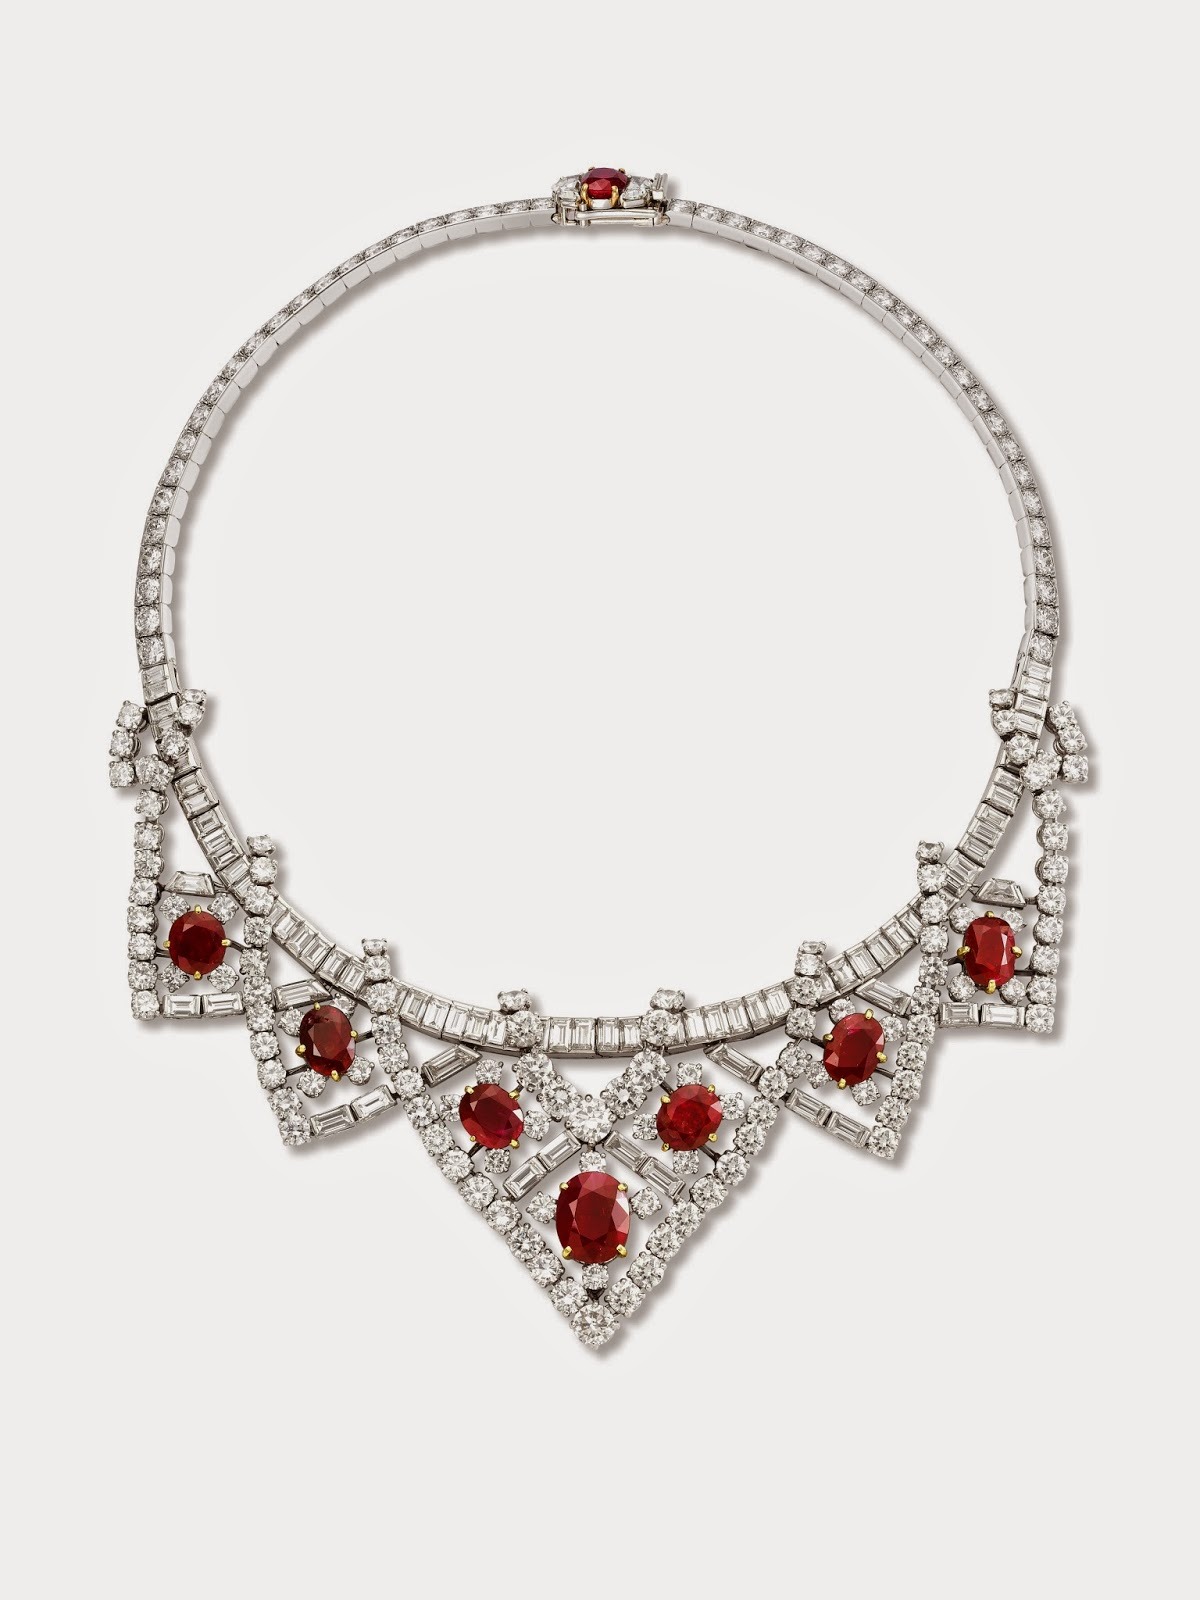 Necklace worn by Elizabeth Taylor. Cartier Paris, 1951, altered in 1953. Platinum, diamonds, rubies. Cartier Collection. Photo credit: Vincent Wulveryck